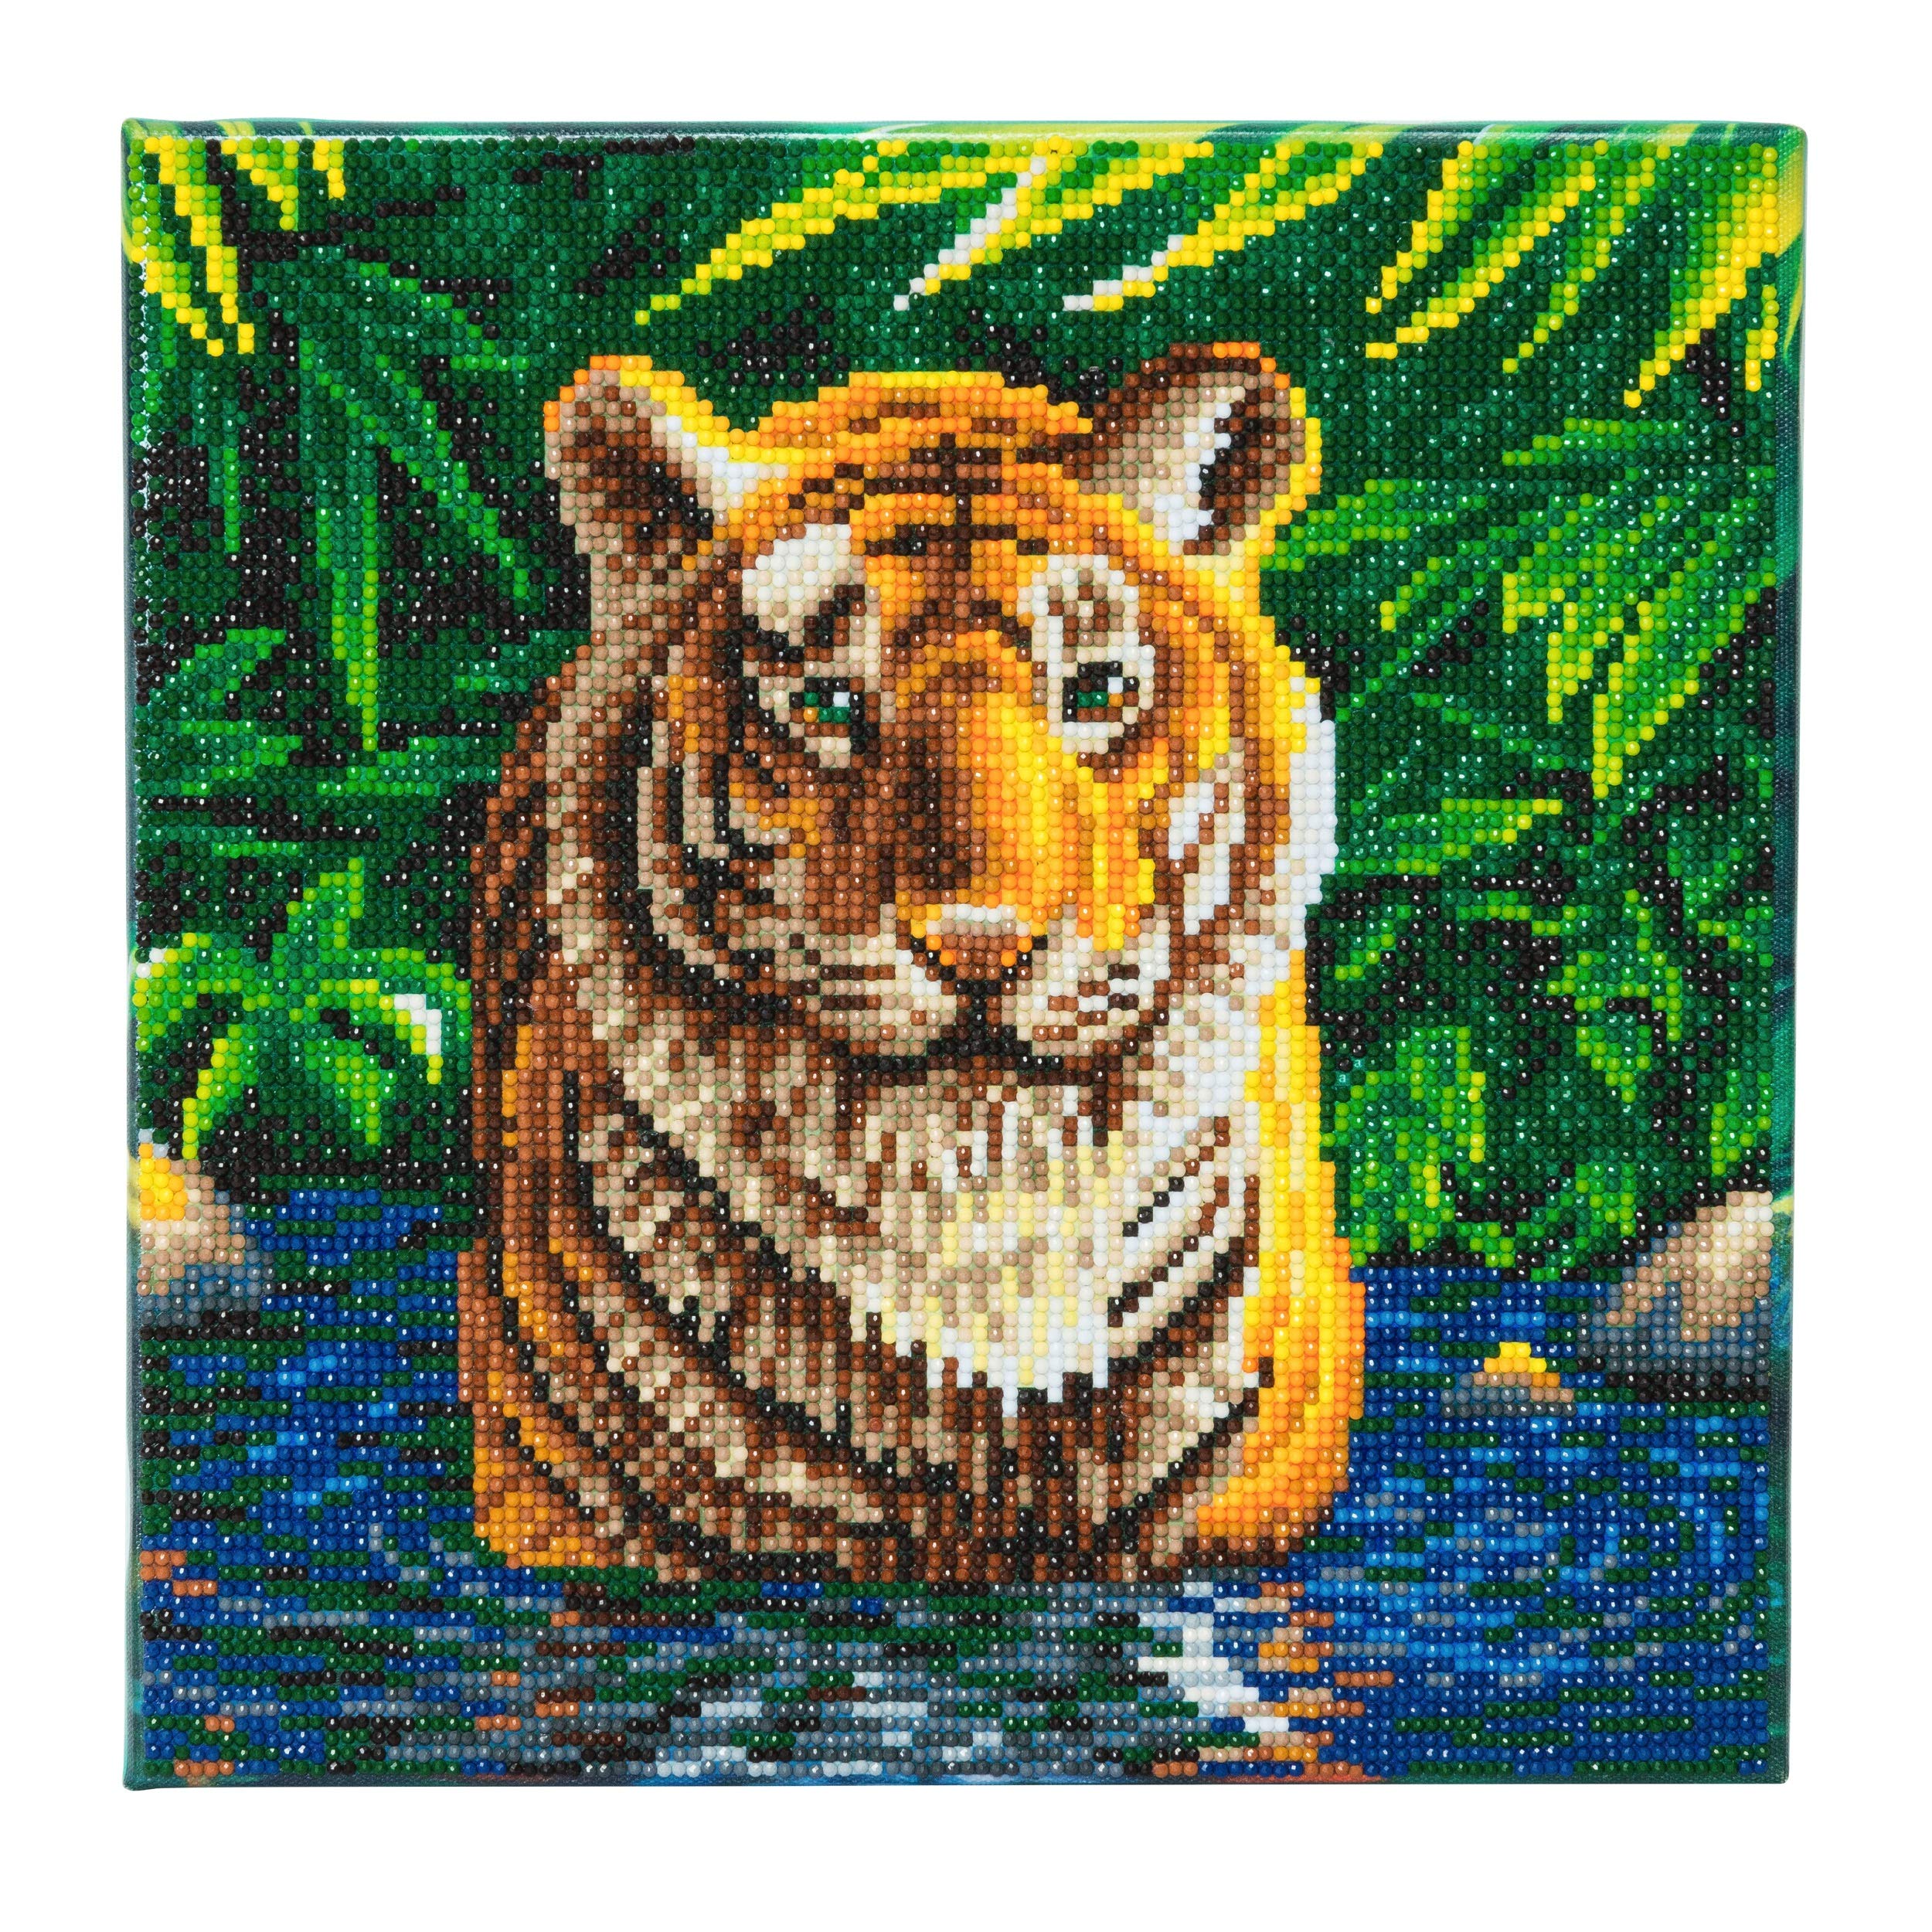 Crystal Art CAK-A74 Tiger-Pool, Kristallkunst 30x30cm Framed Kits, Multicolor, 12 x 12 inches